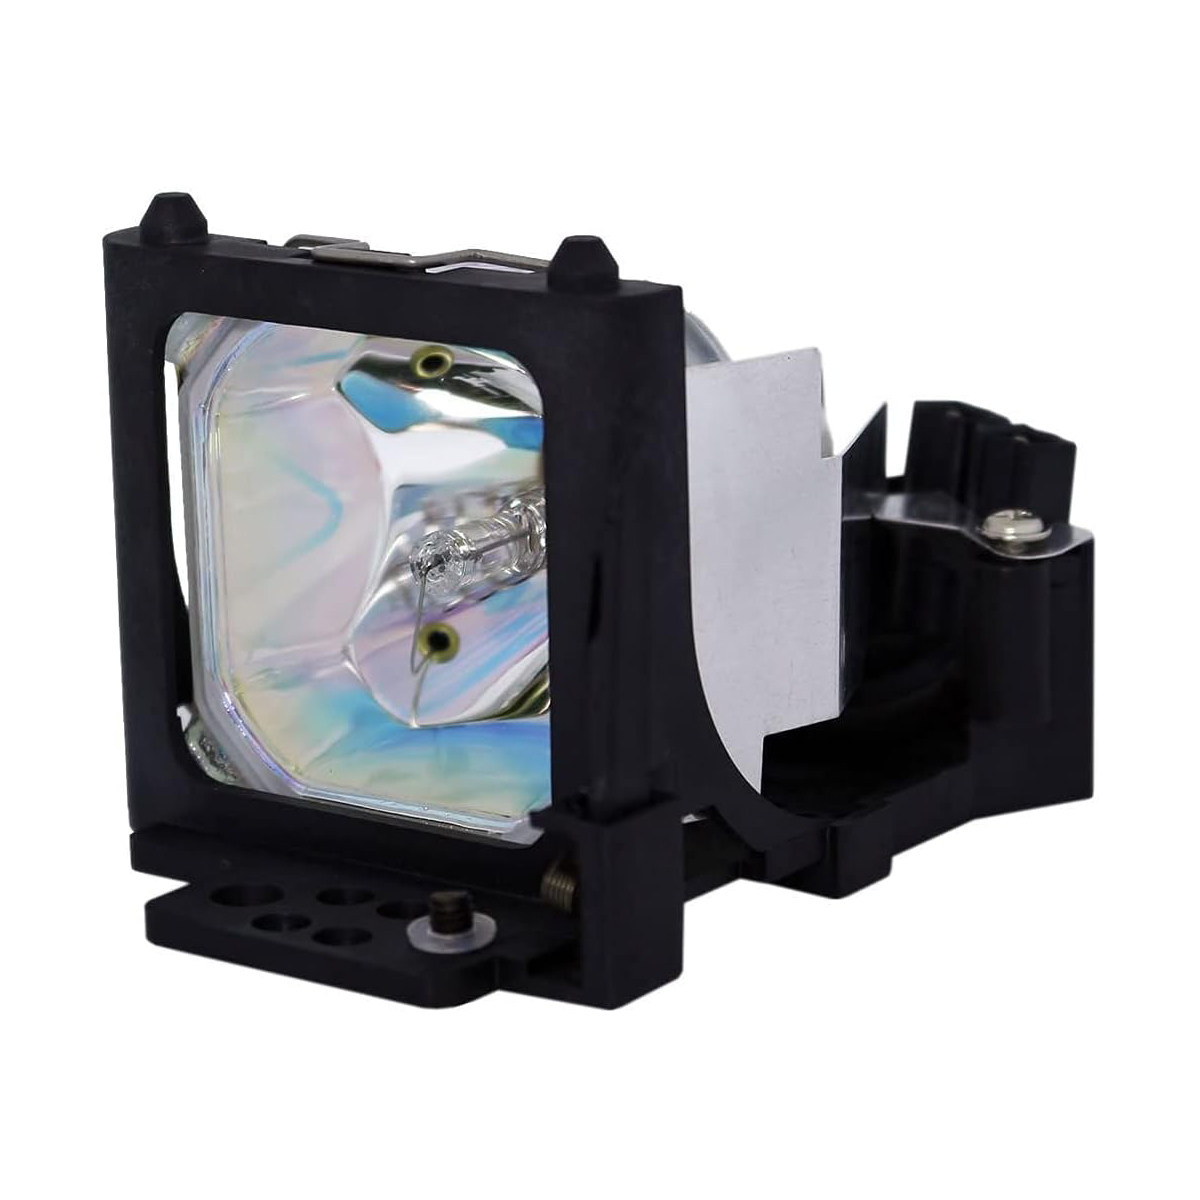 Replacement Projector lamp 78-6969-9205-2 For 3M MP7640  MP7740